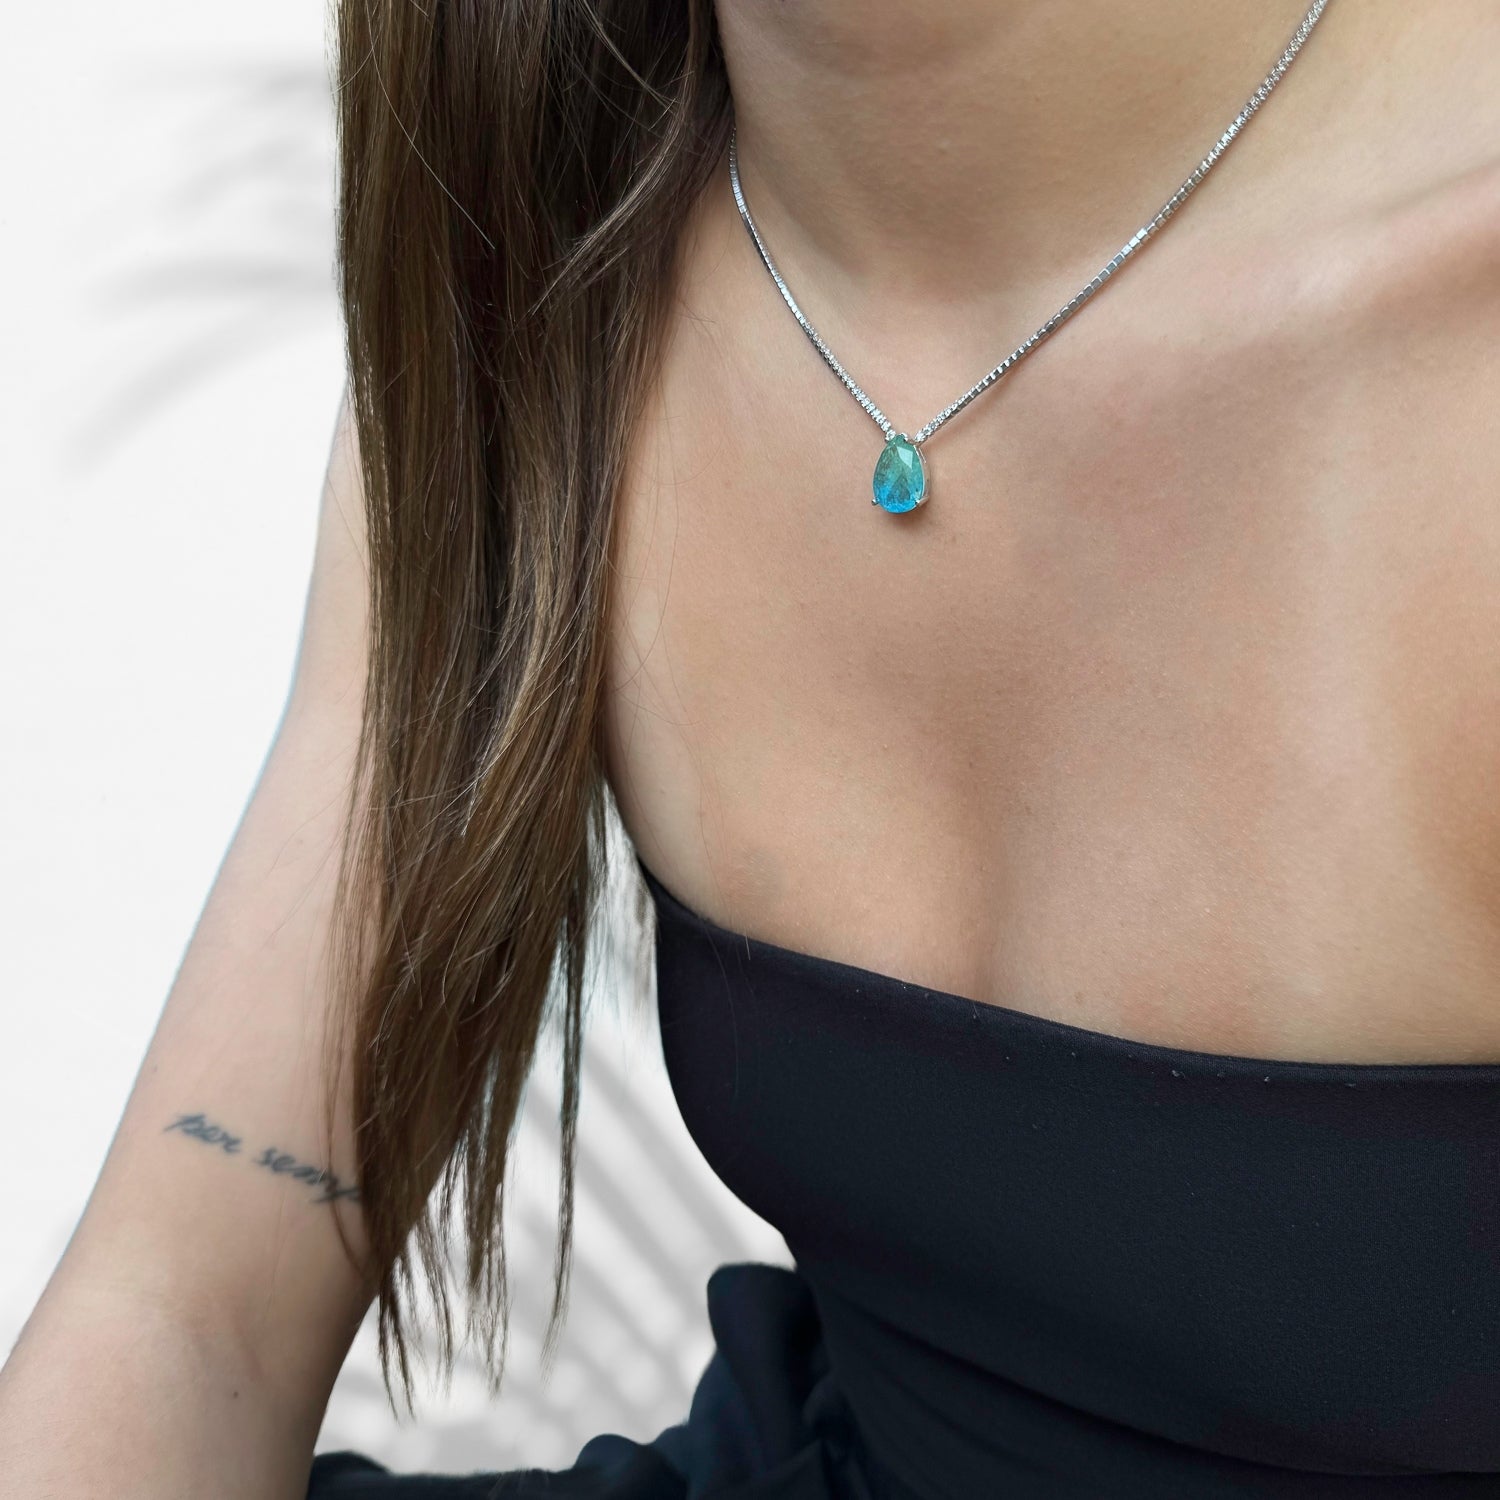 Model Wearing Handmade Brilliance: Sterling Silver Necklace with Rare Gemstone